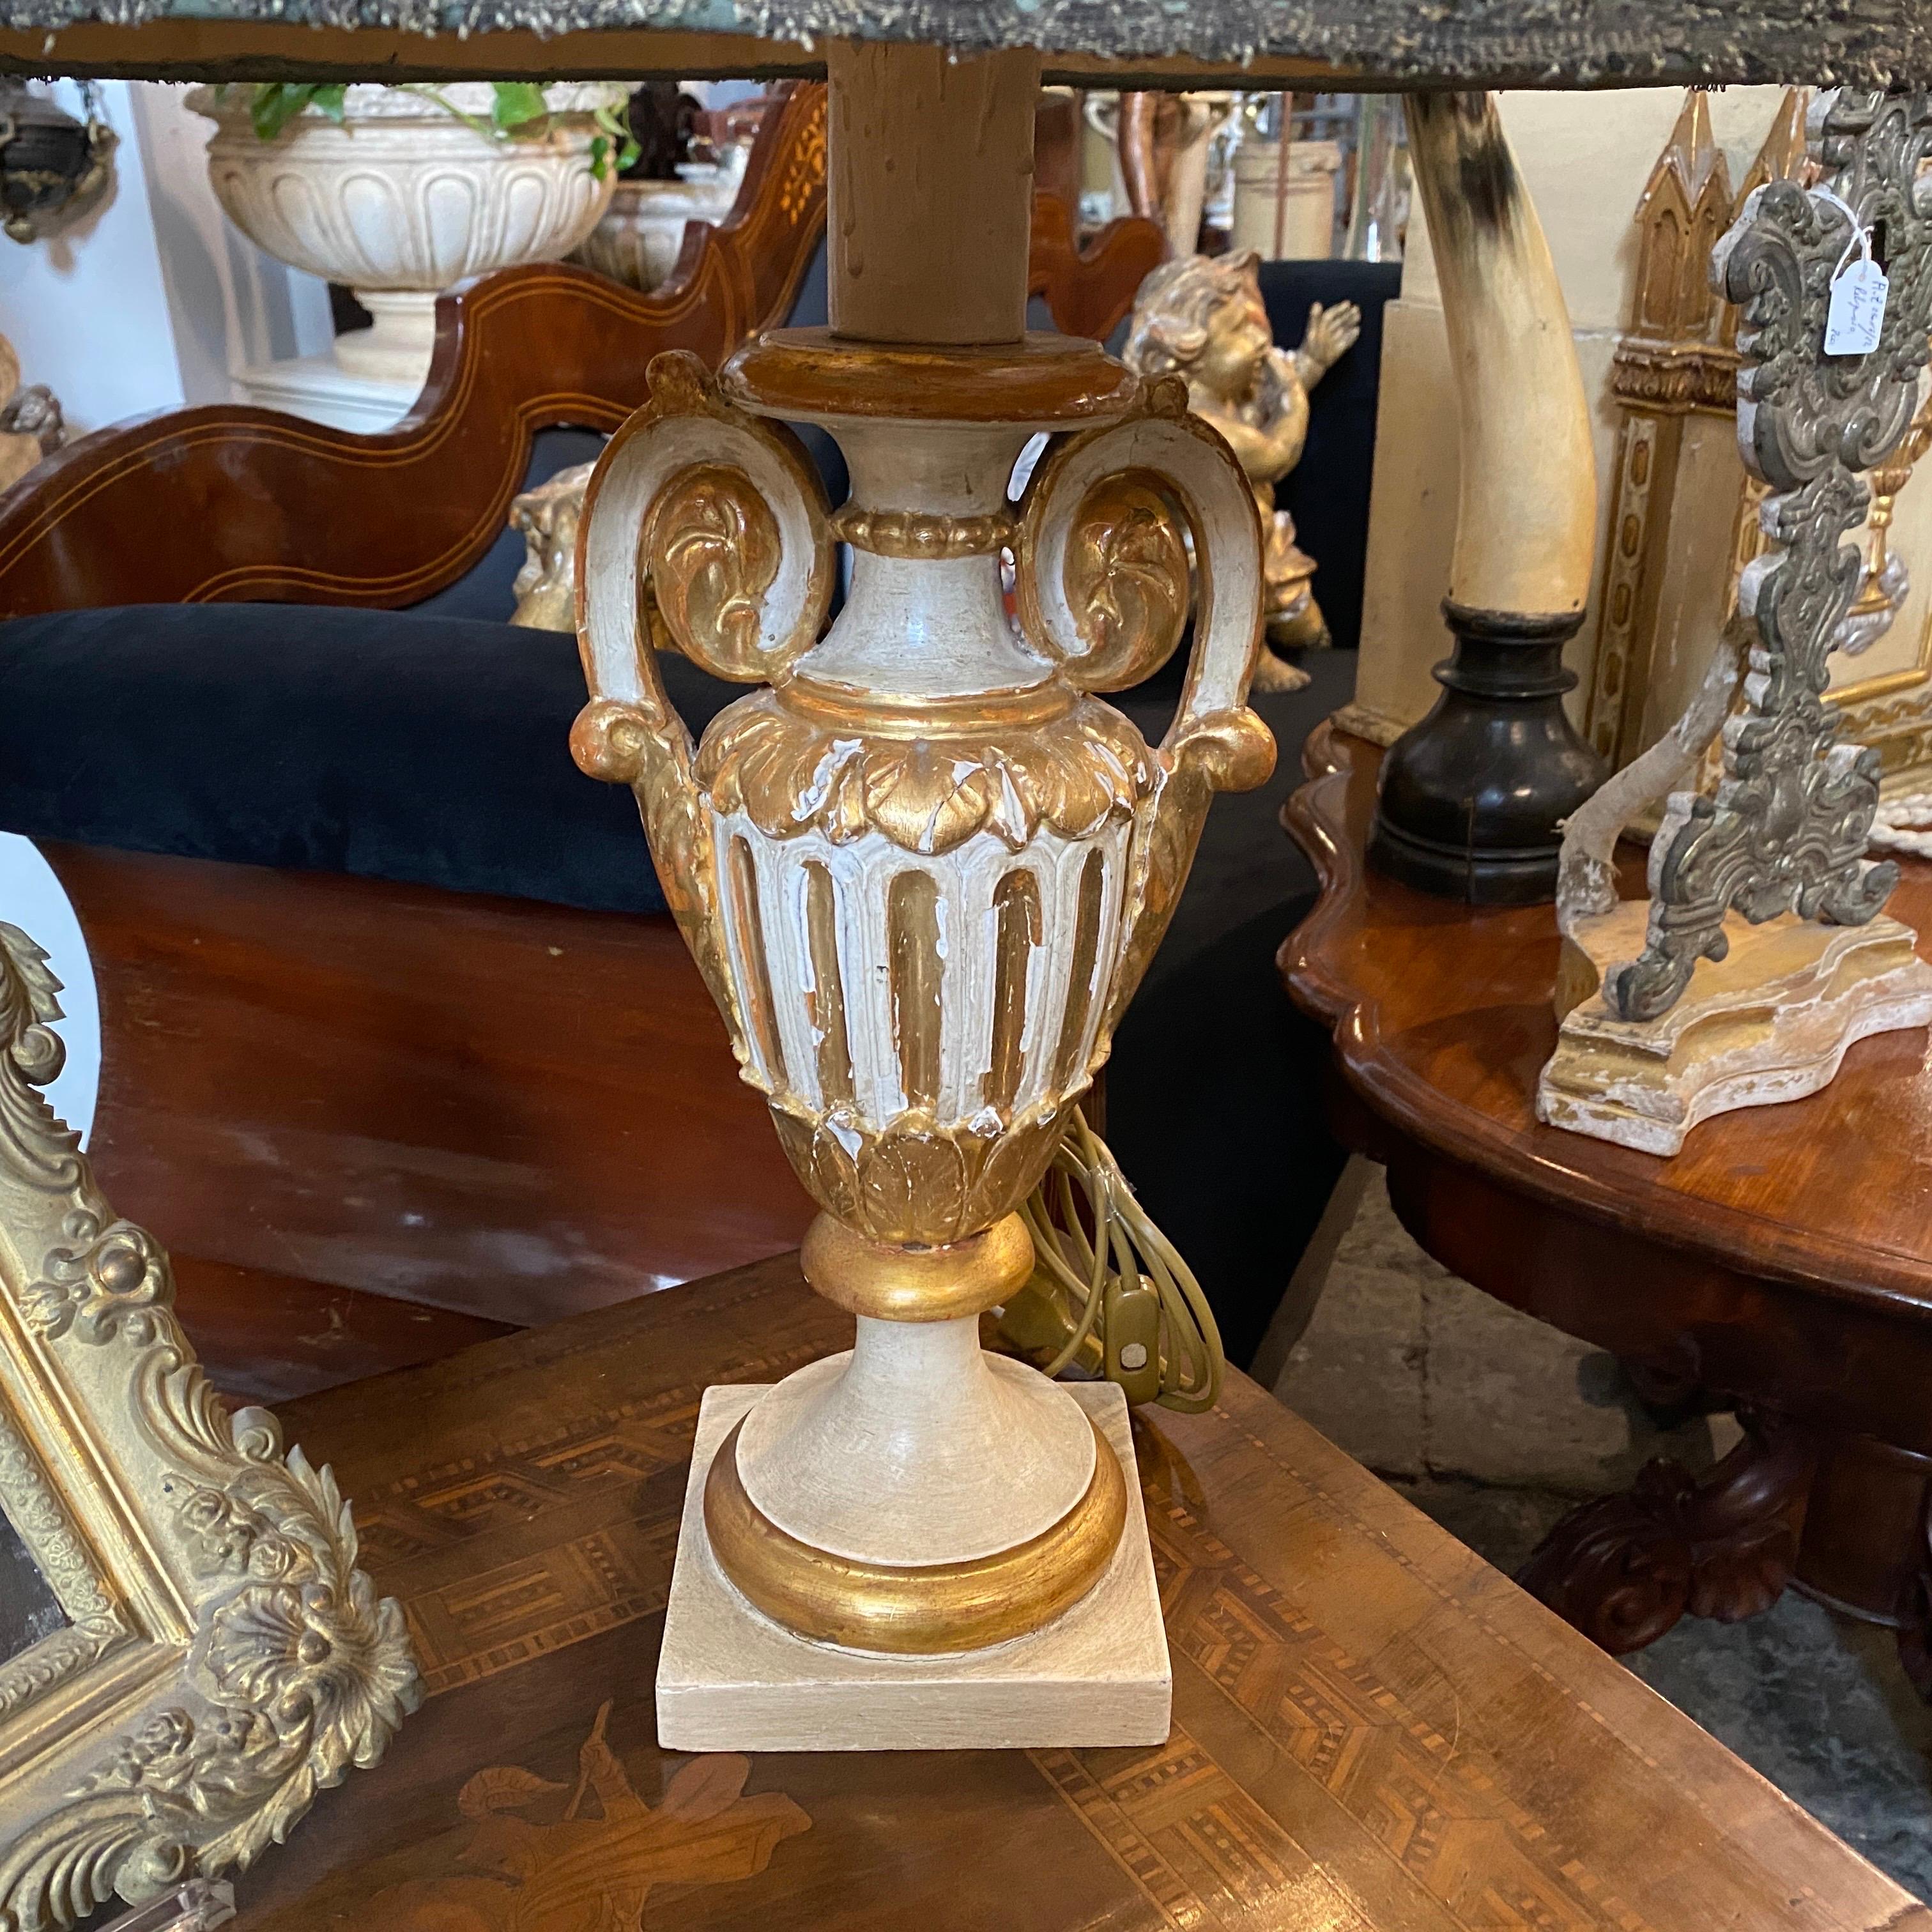 An antique hand-carved, lacquered and gilded wood Sicilian Palm holder, used to decorate antique private church, later it has been transformed in an amazing table lamp, the fabric and silver lampshade it has been totally hand-crafted. We just